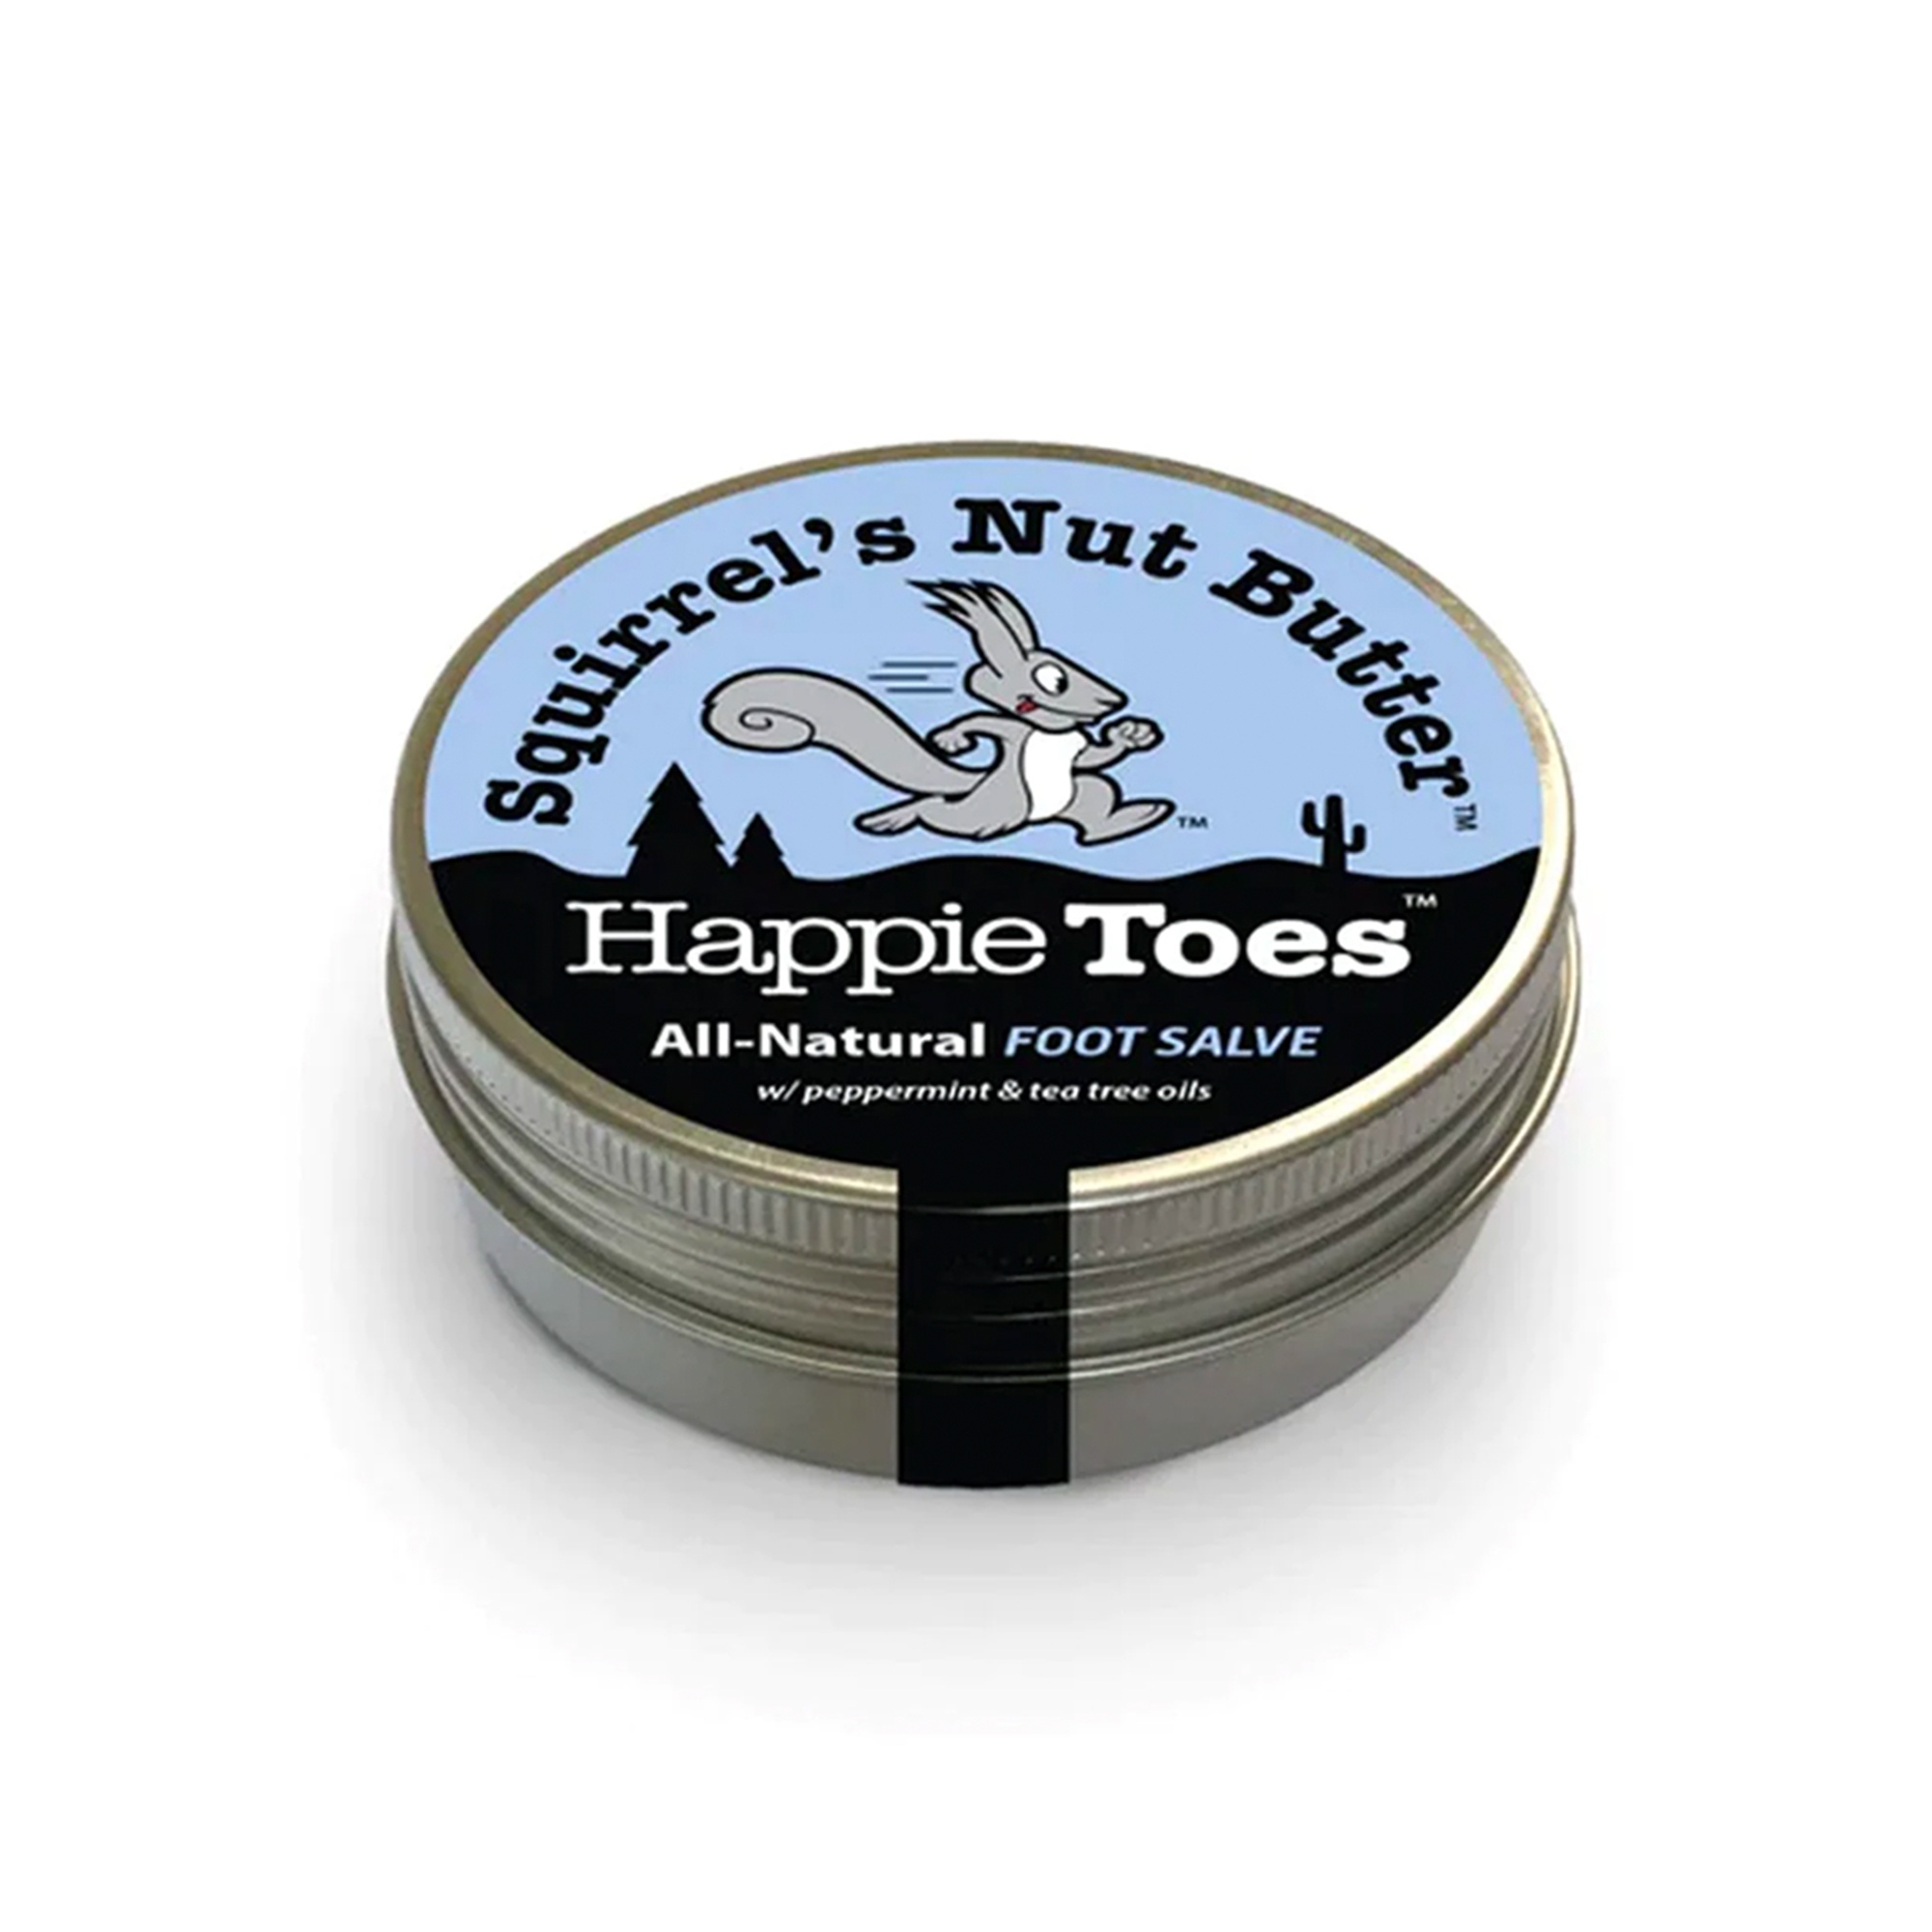 Sáp Chống Phồng Rộp Chạy Bộ Squirrel’s Nut Butter - Happie Toes (56g)